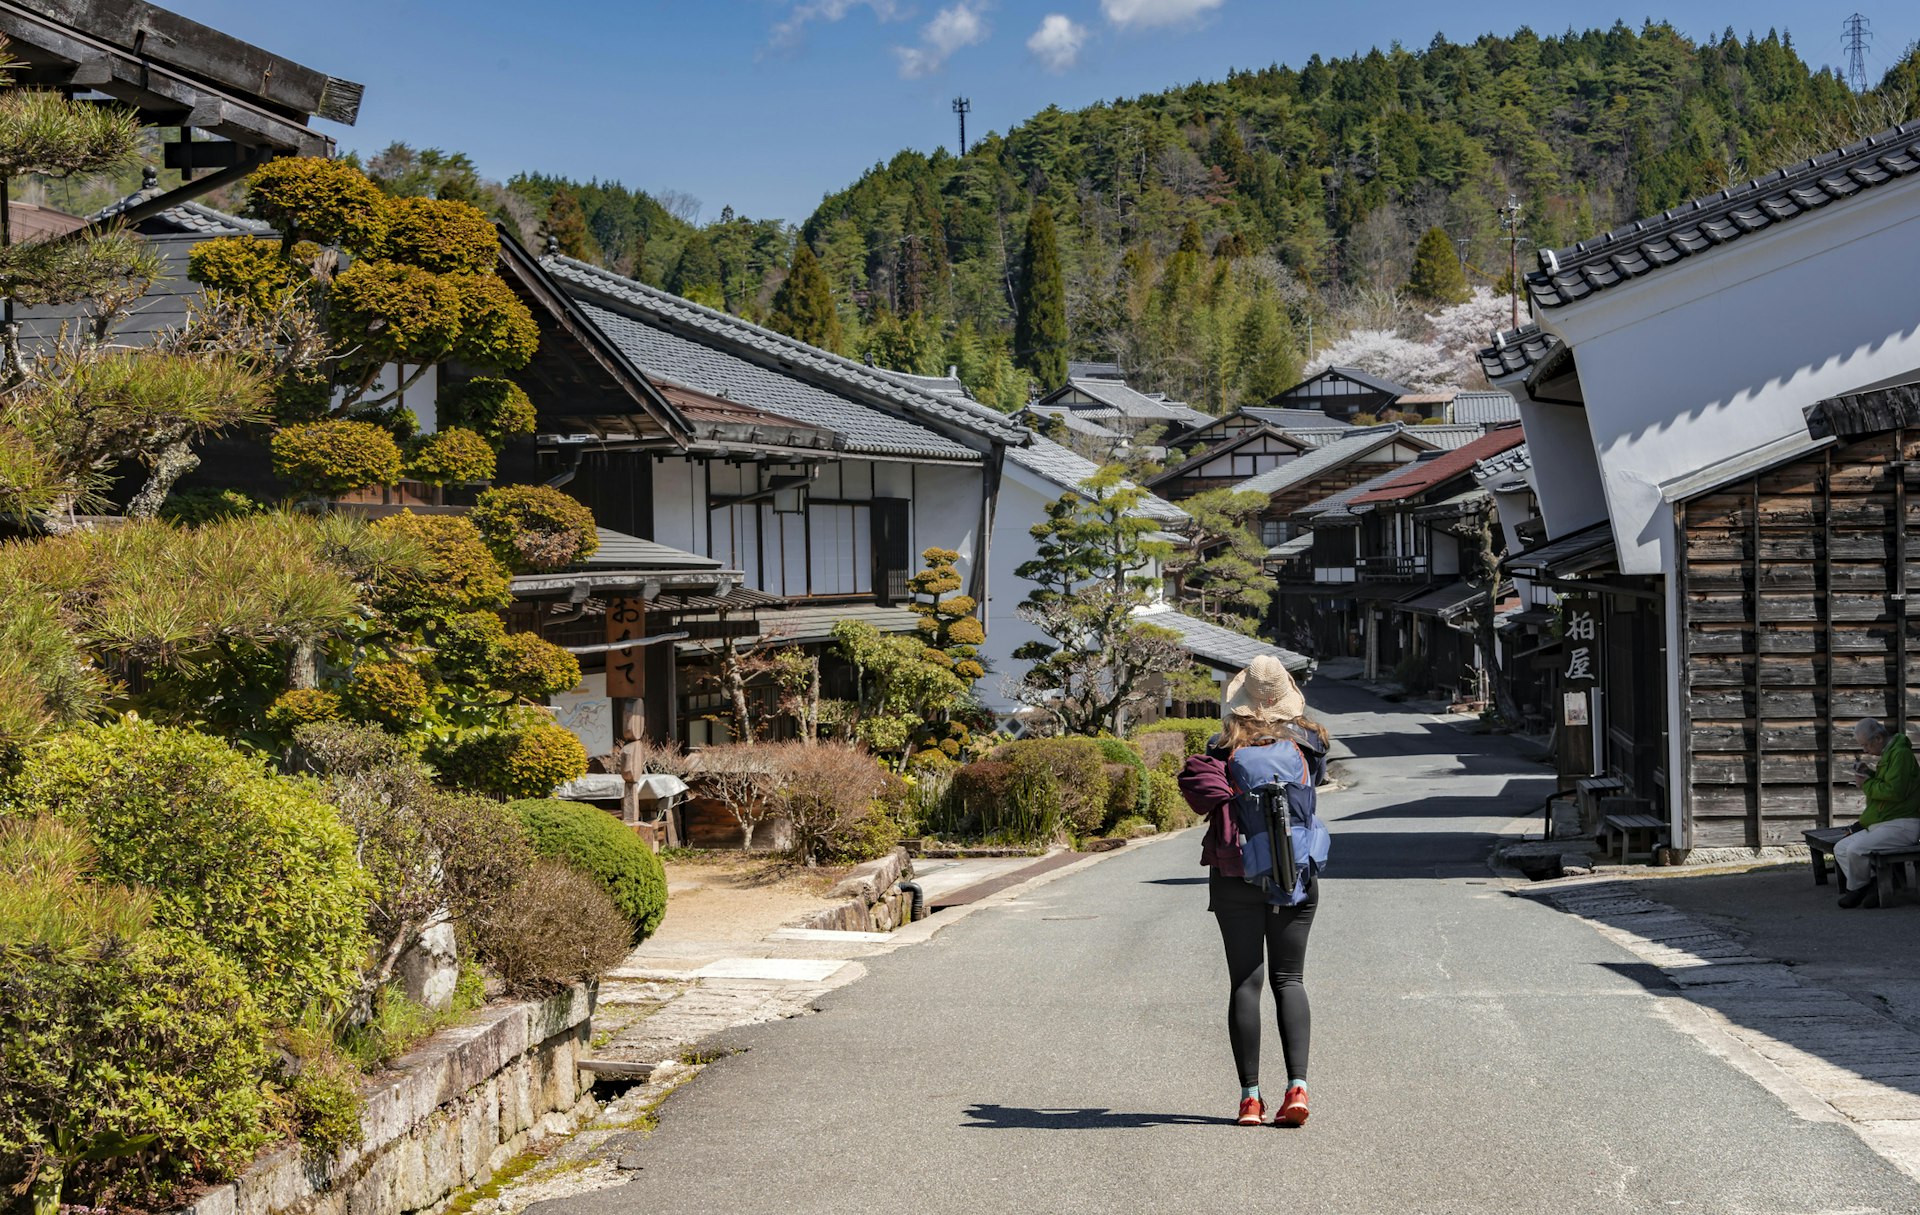 A solo hiker on the Nakasendo path through a traditional Japanese village. The path is lined with wooden low-rise houses